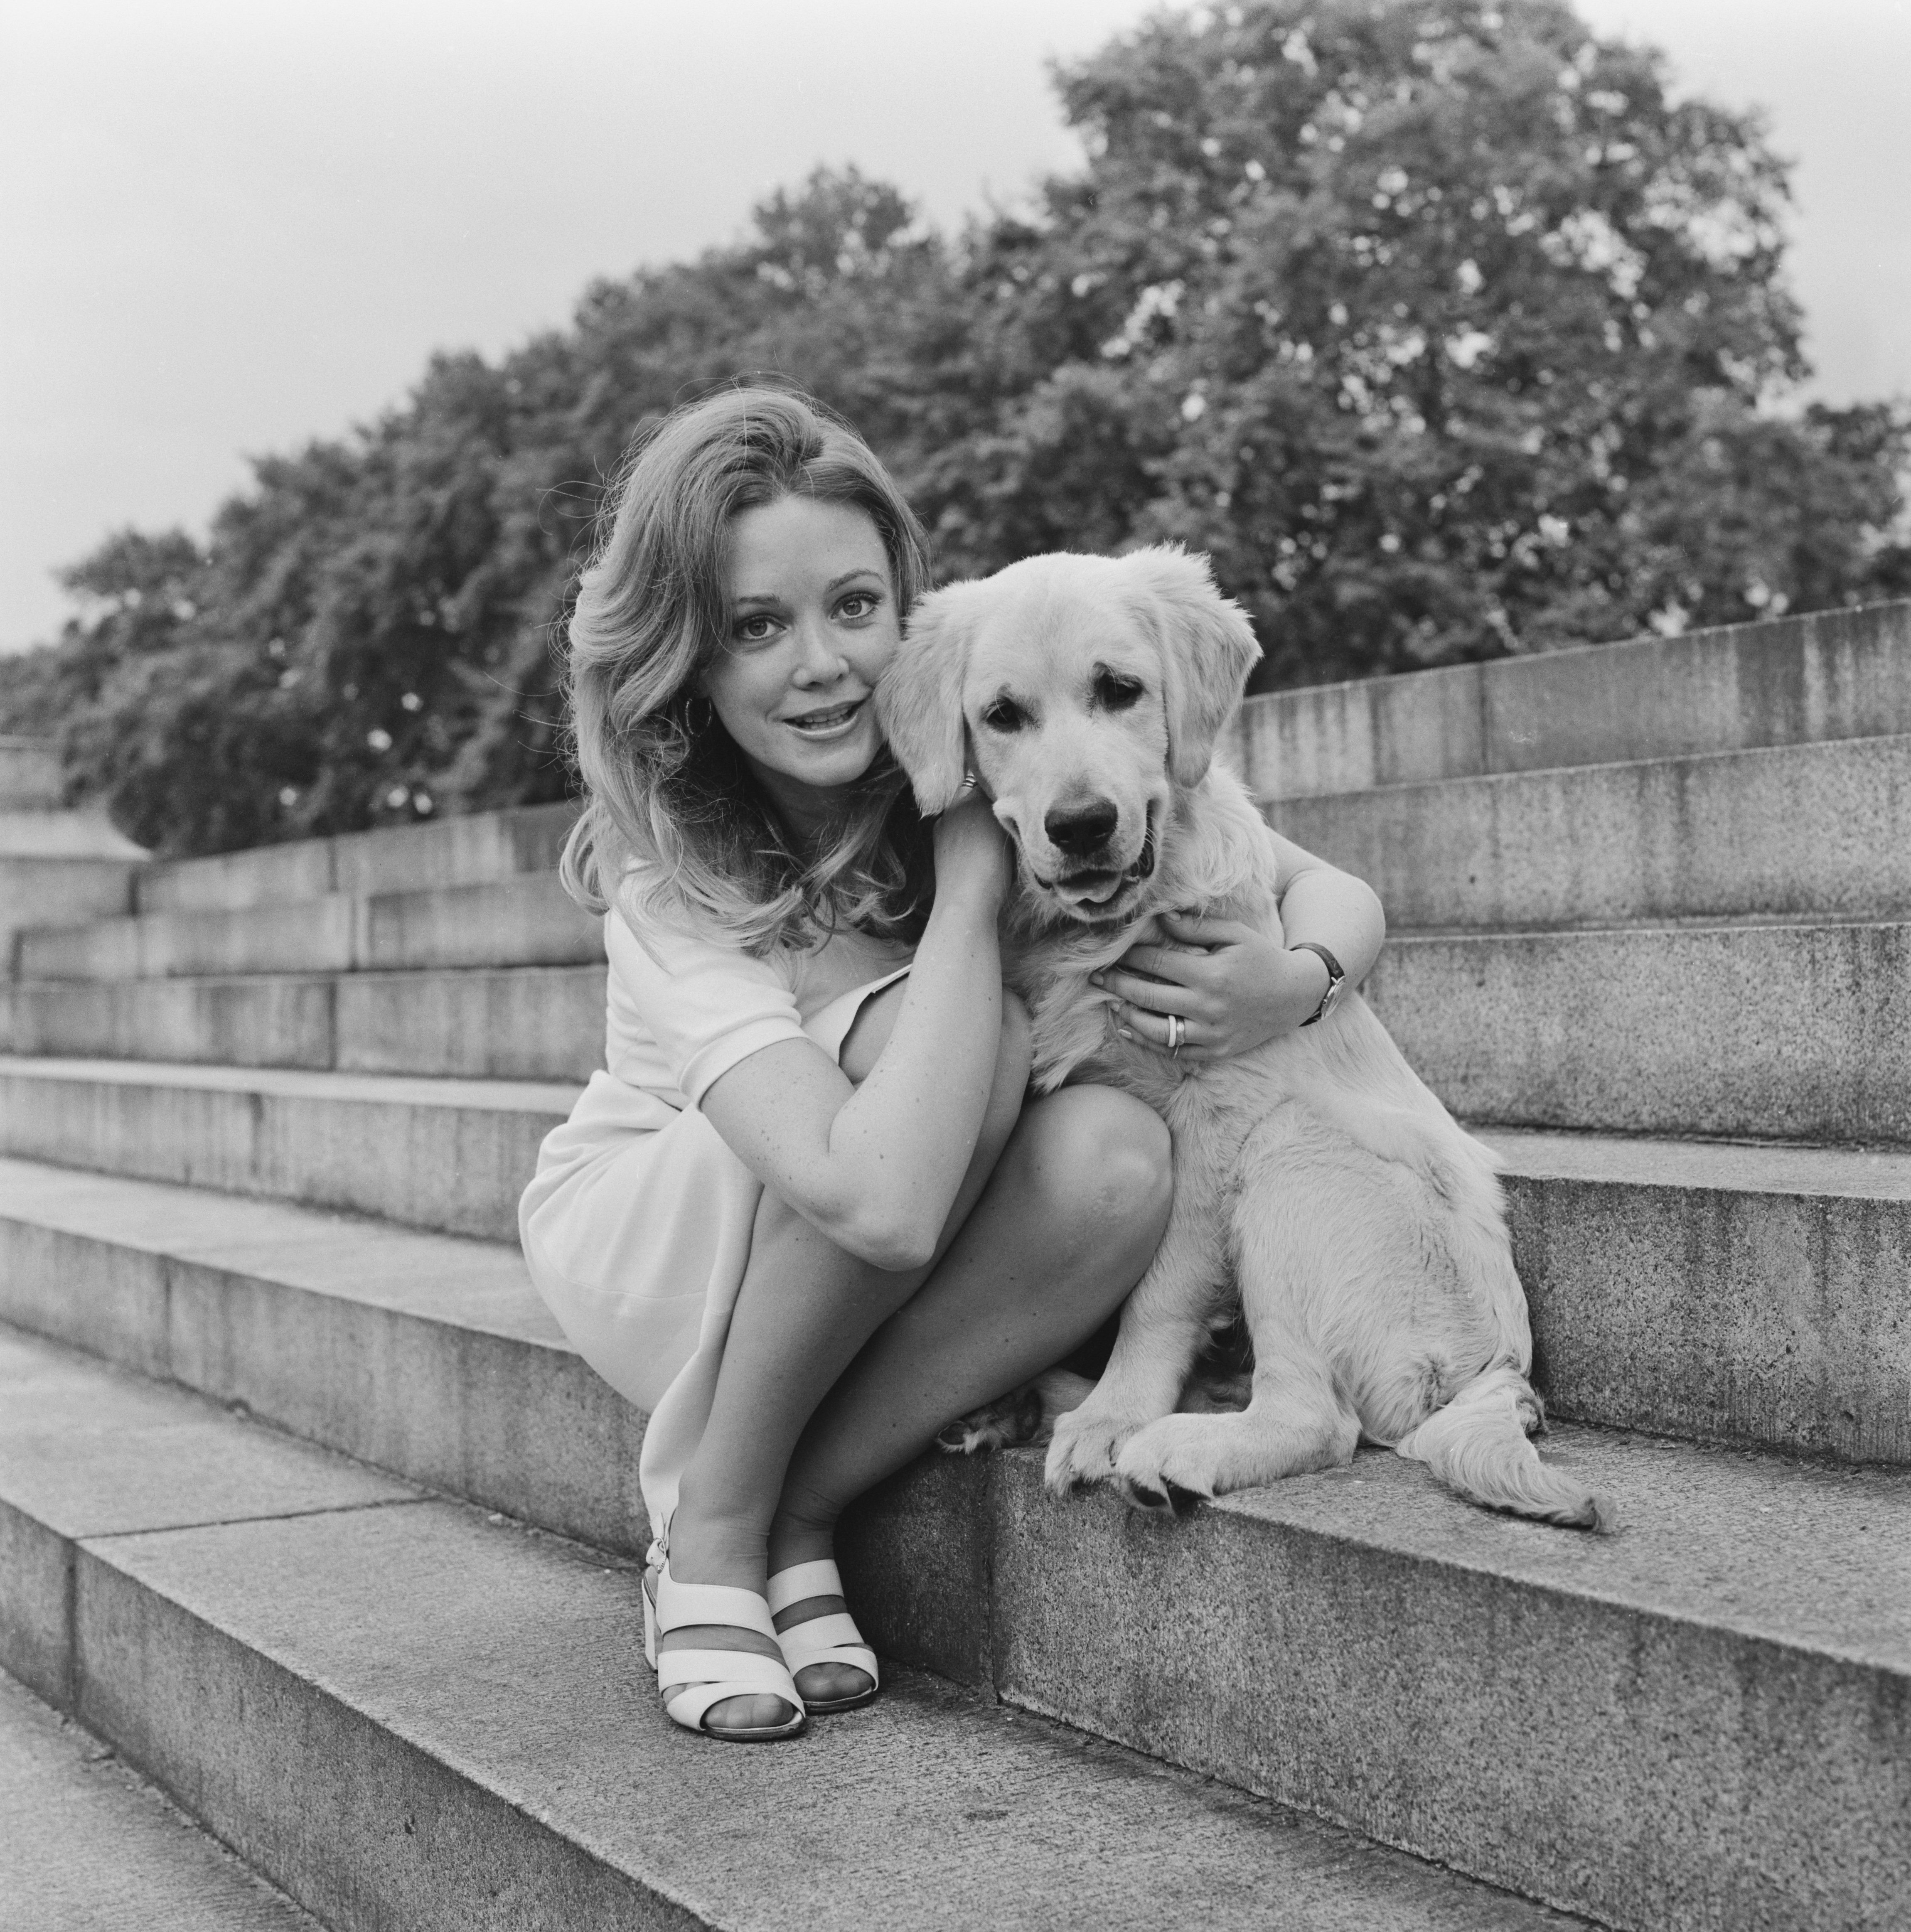 Elaine Taylor poses with a retriever dog sitting on a flight of stone steps on June 29, 1972 | Source: Getty Images